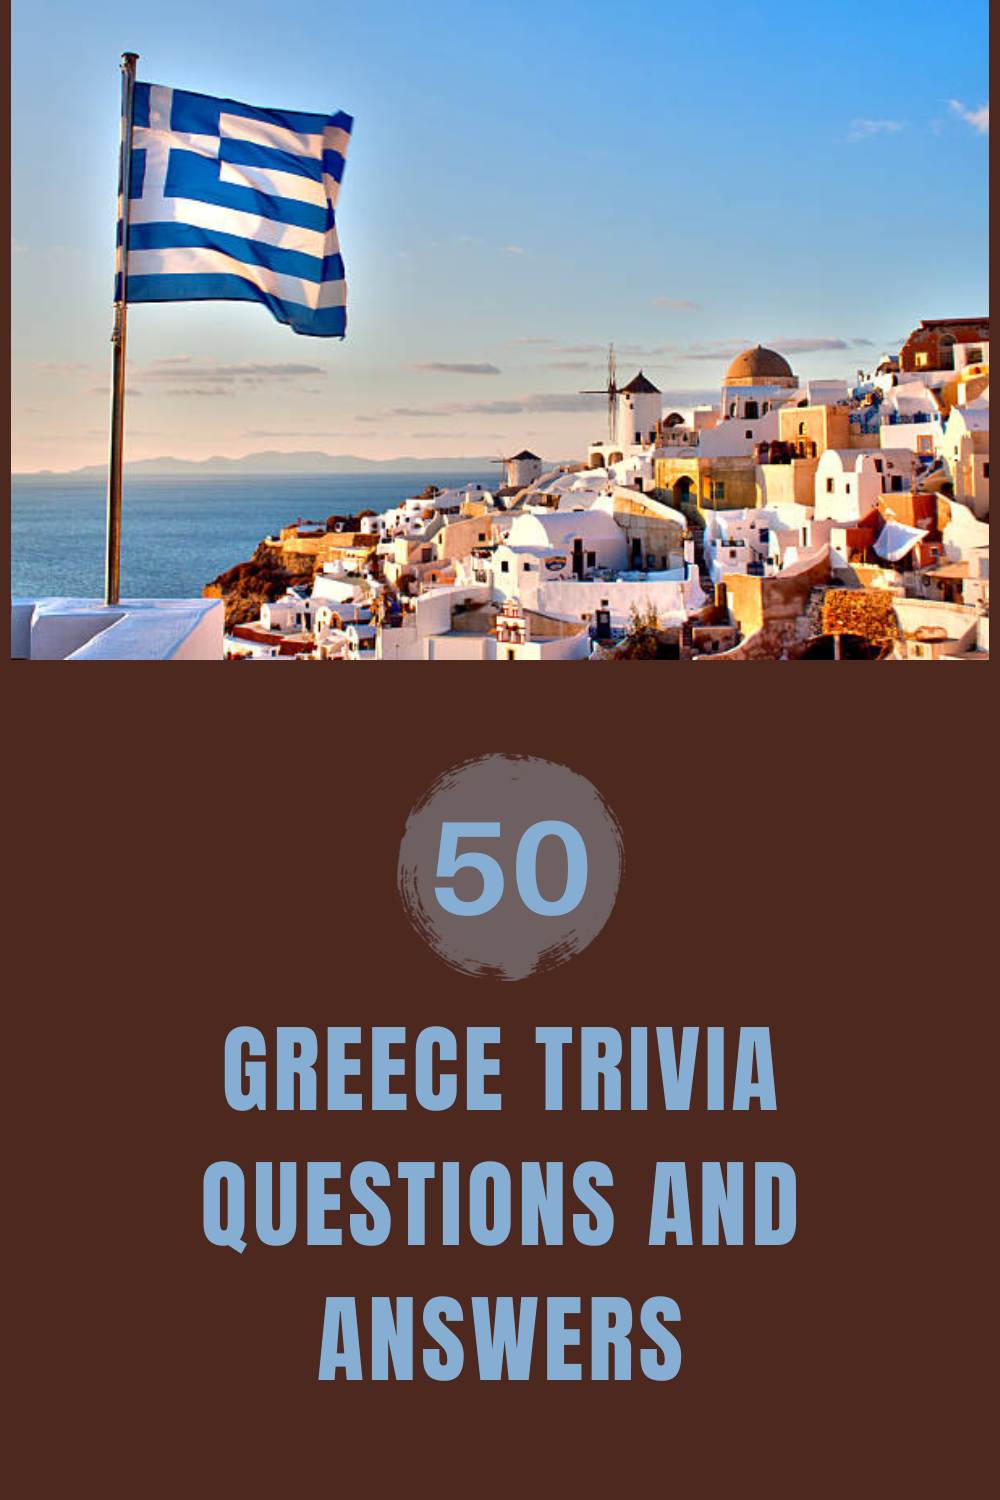 50 Greece Trivia Questions and Answers